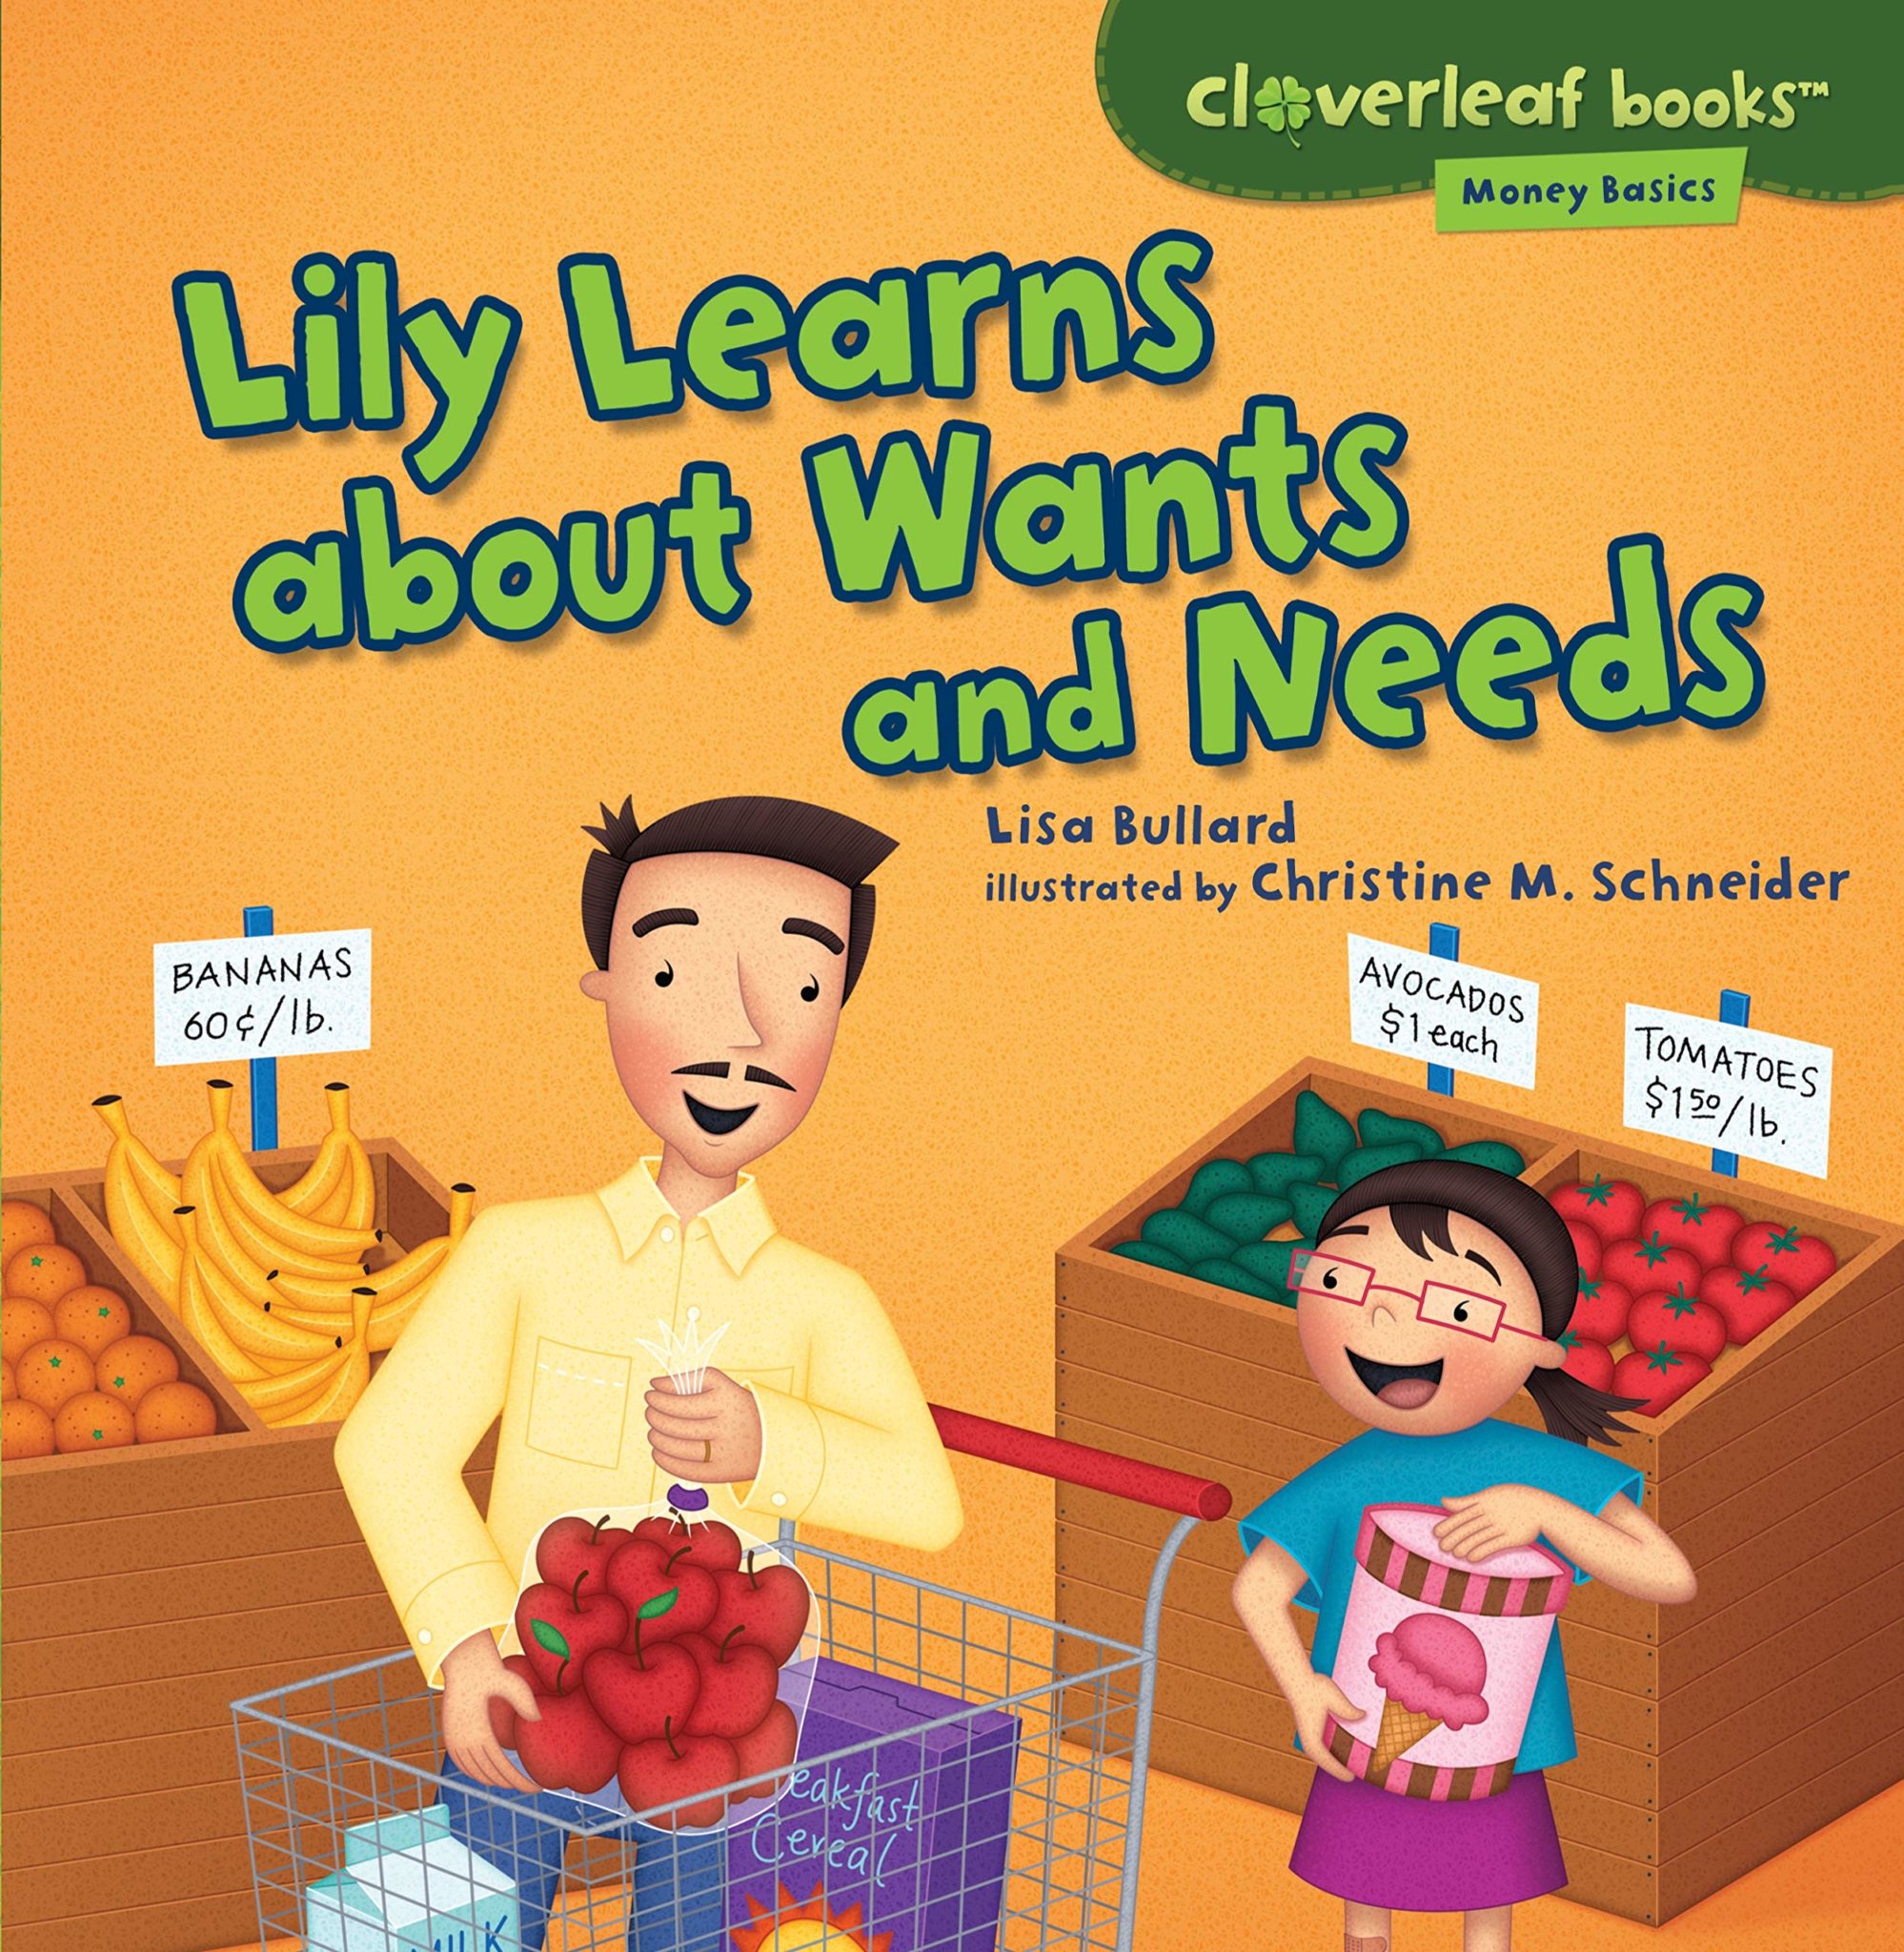 The cover of the picture book "Lily Learns About Wants and Needs" features a smiling dad and his young daughter shopping in a grocery store produce section. The dad pushes a cart and holds a bag of apples, while his daughter shows him a tub of ice cream. 